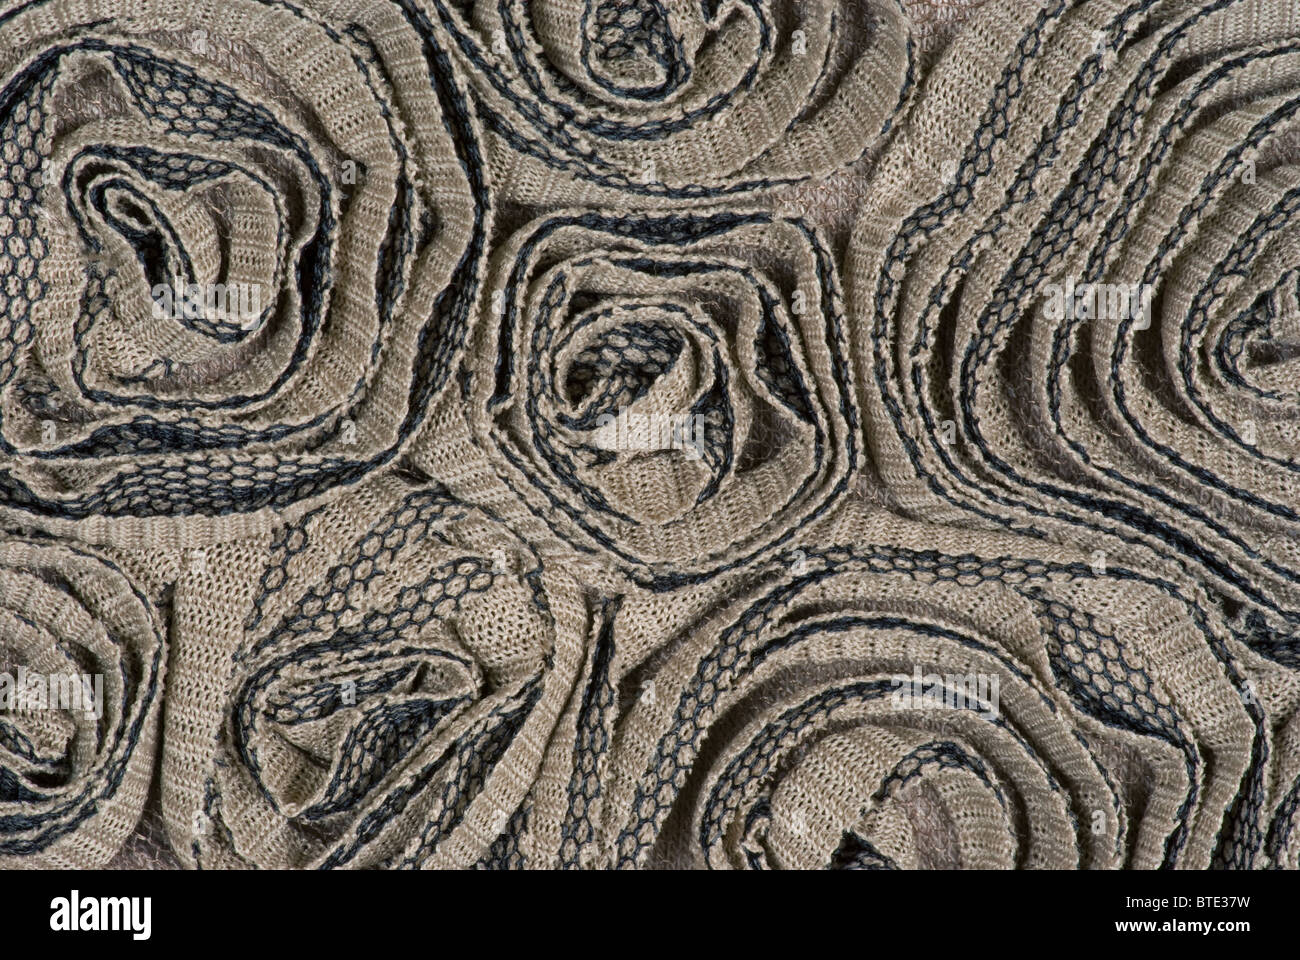 Fabric sculpture. Cotton polyester knit sculpted fabric into round rosette shapes. Stock Photo